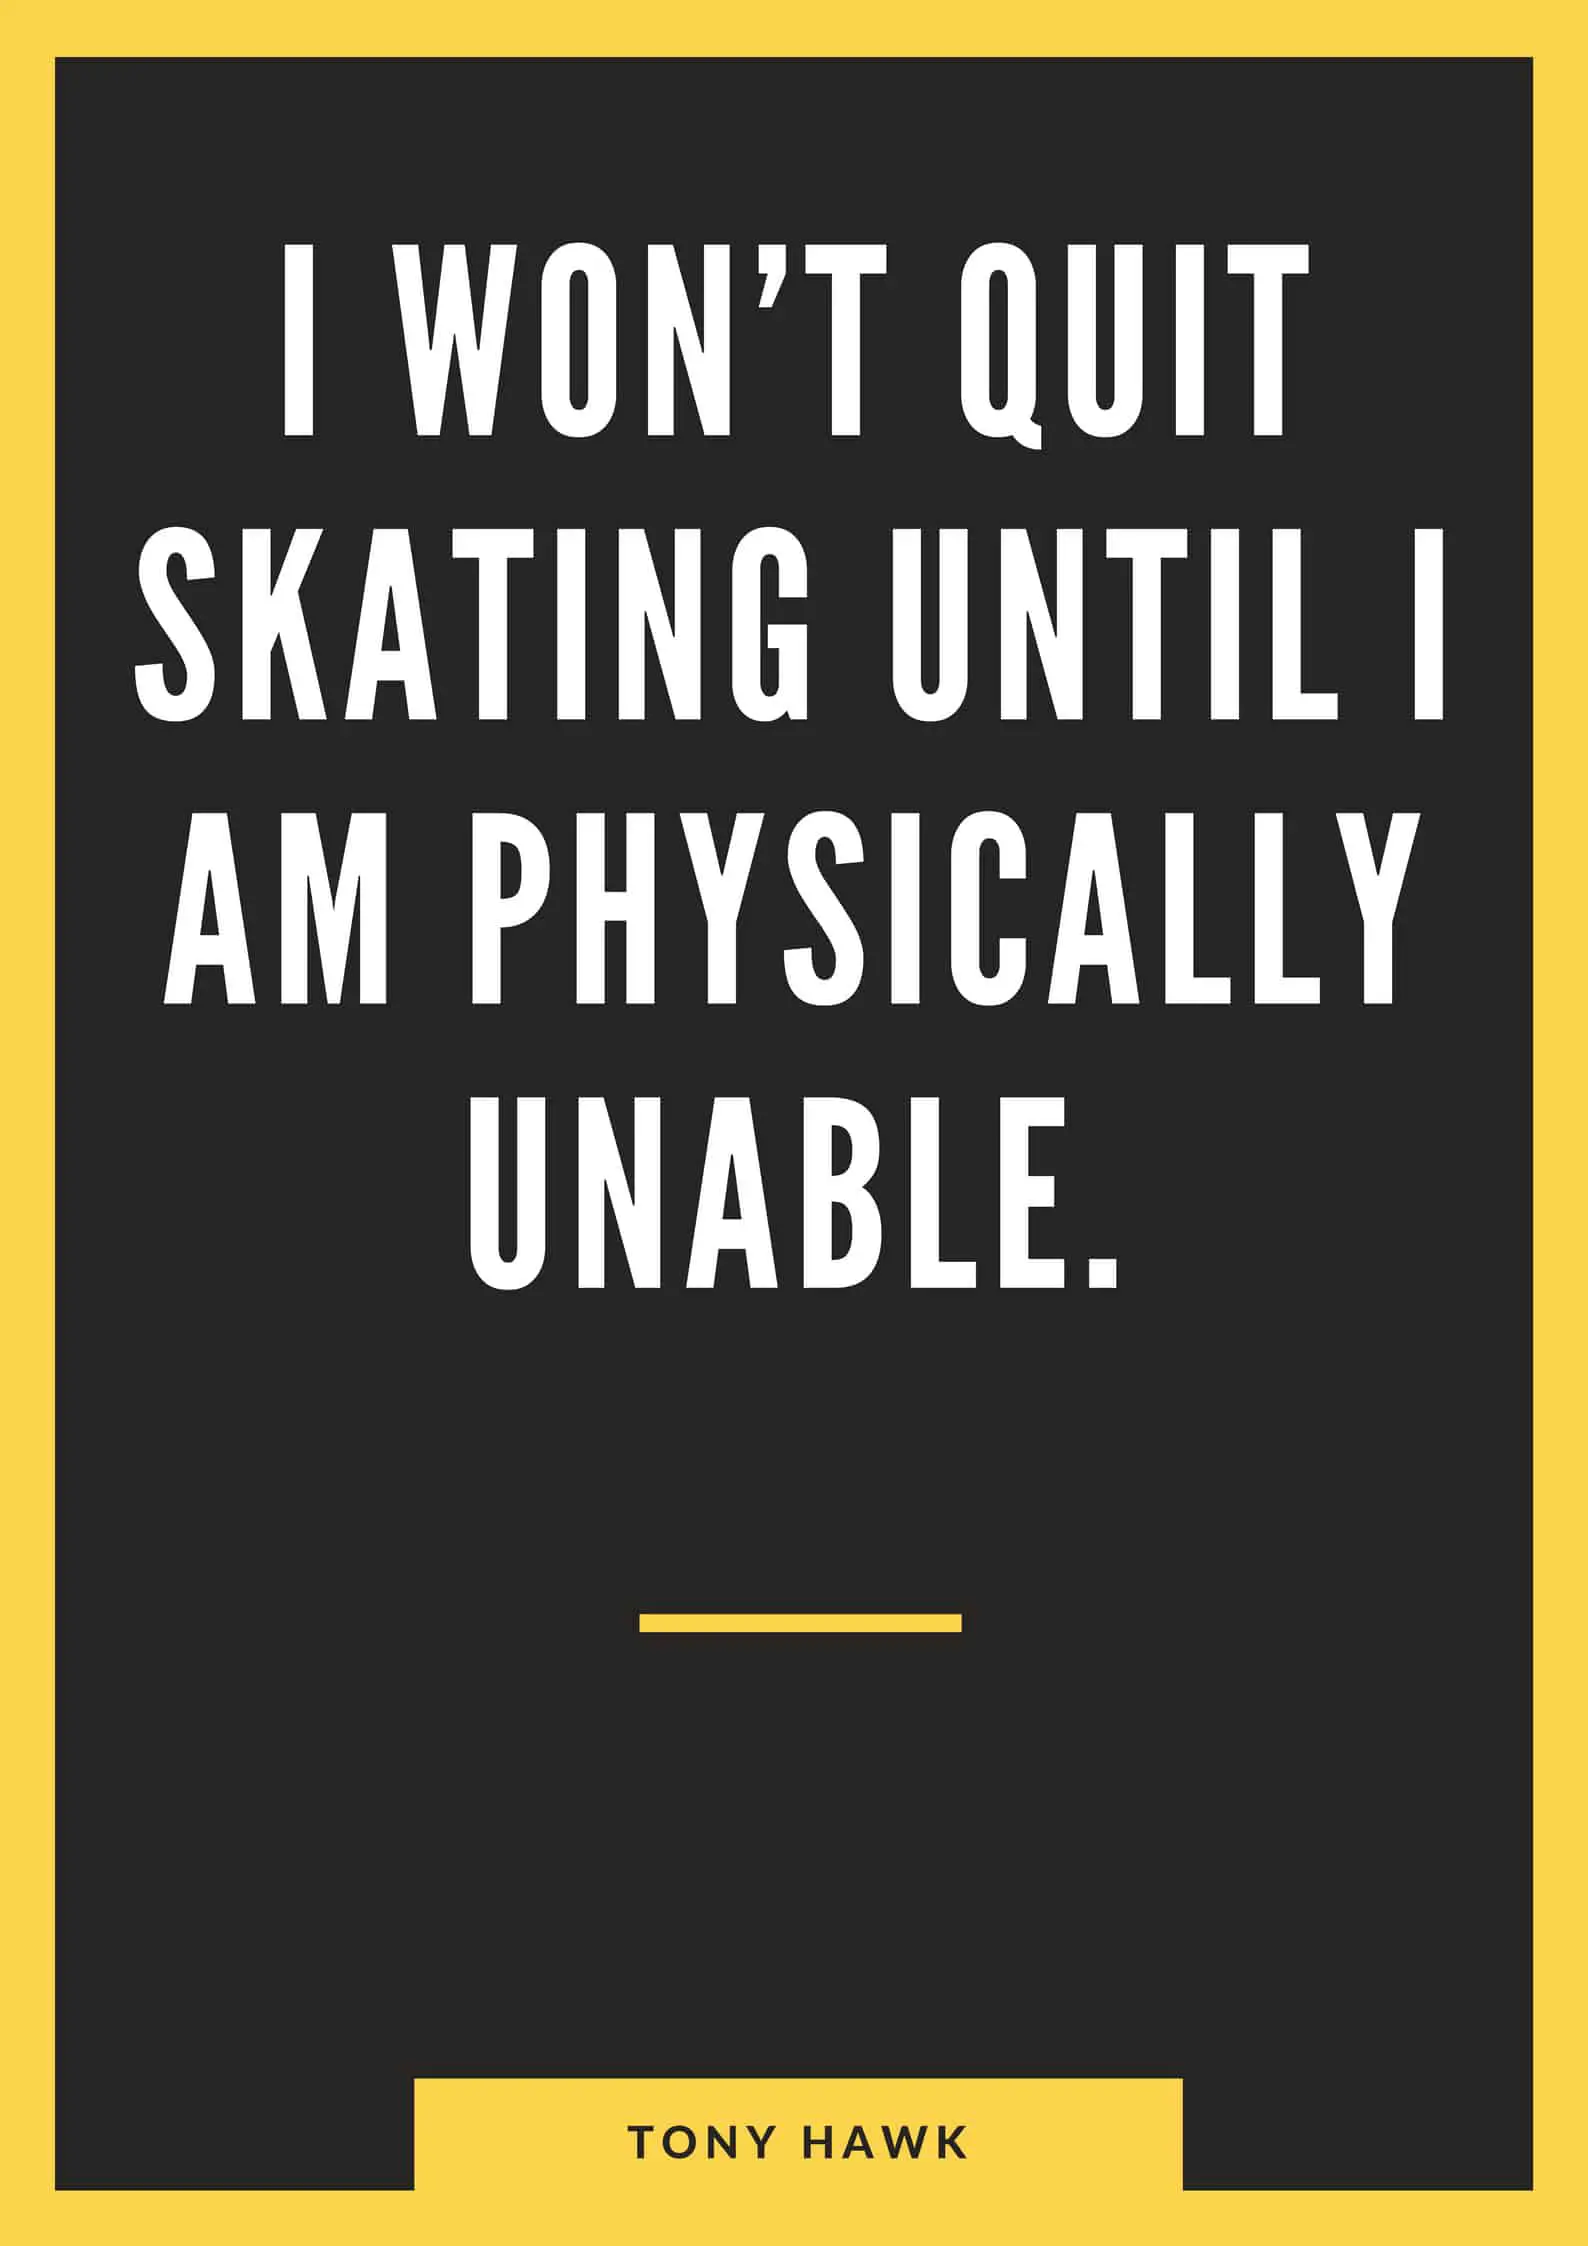 I won’t quit skating until I am physically unable.